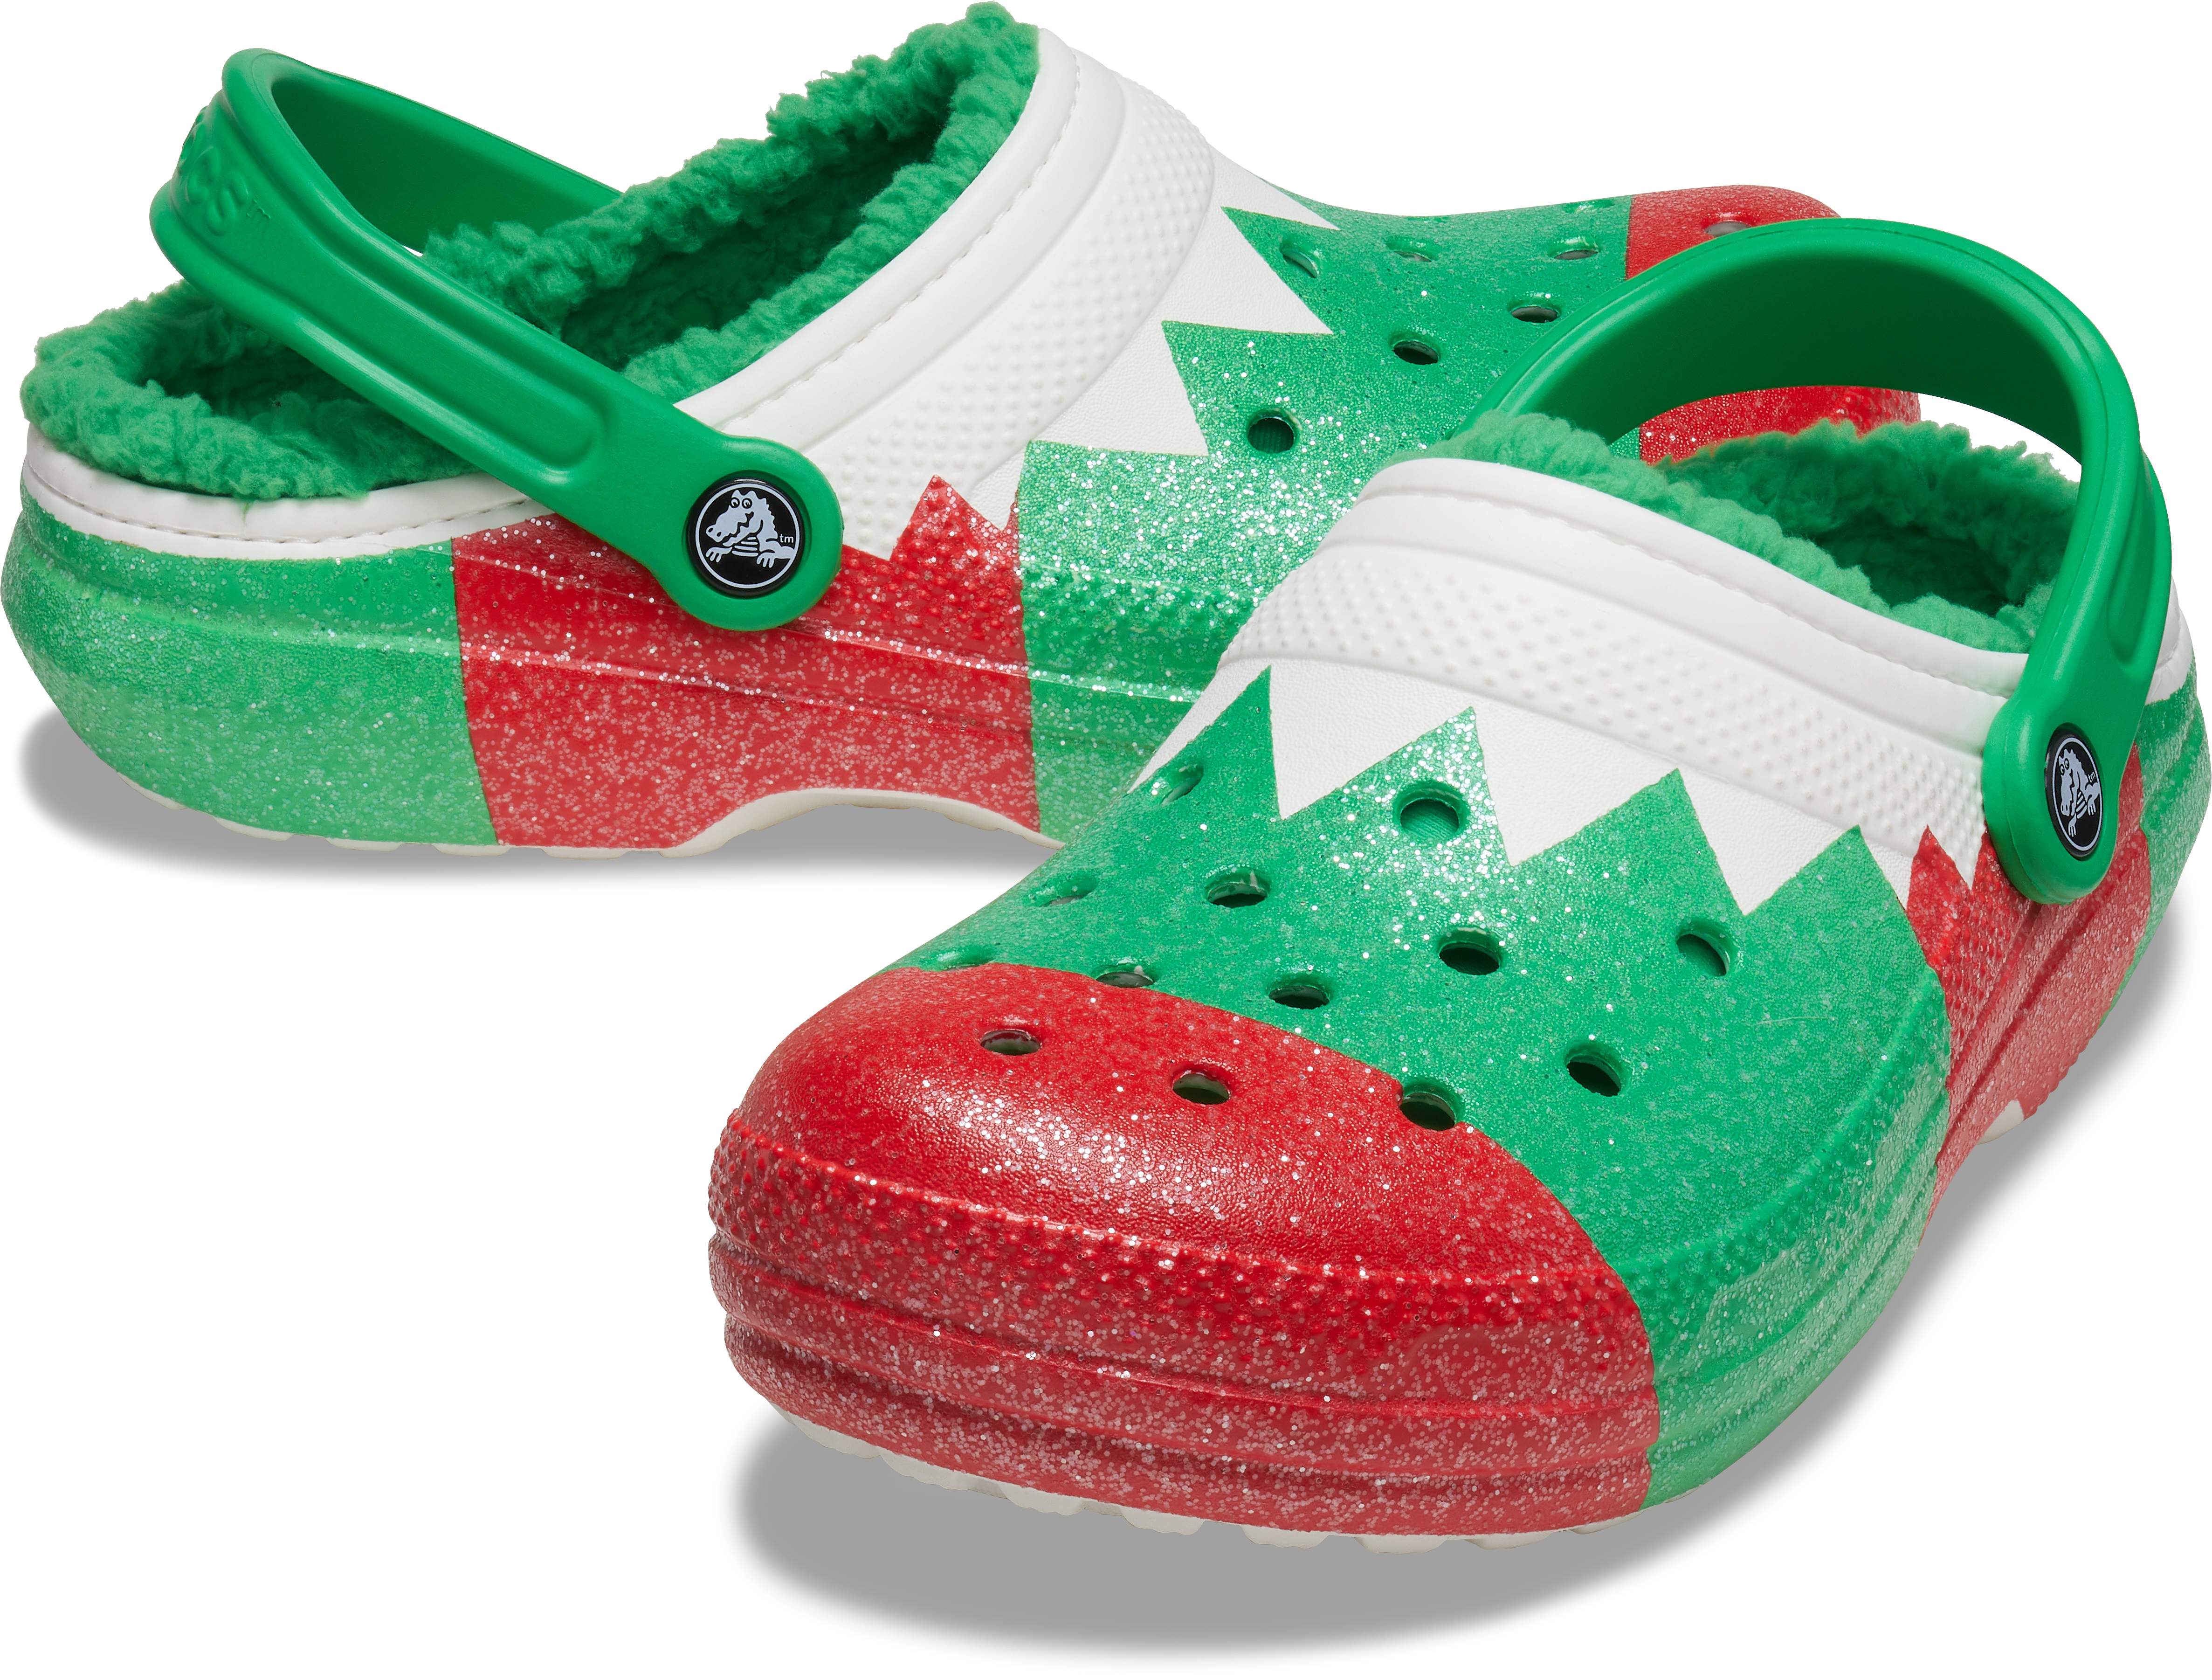 white and red crocs